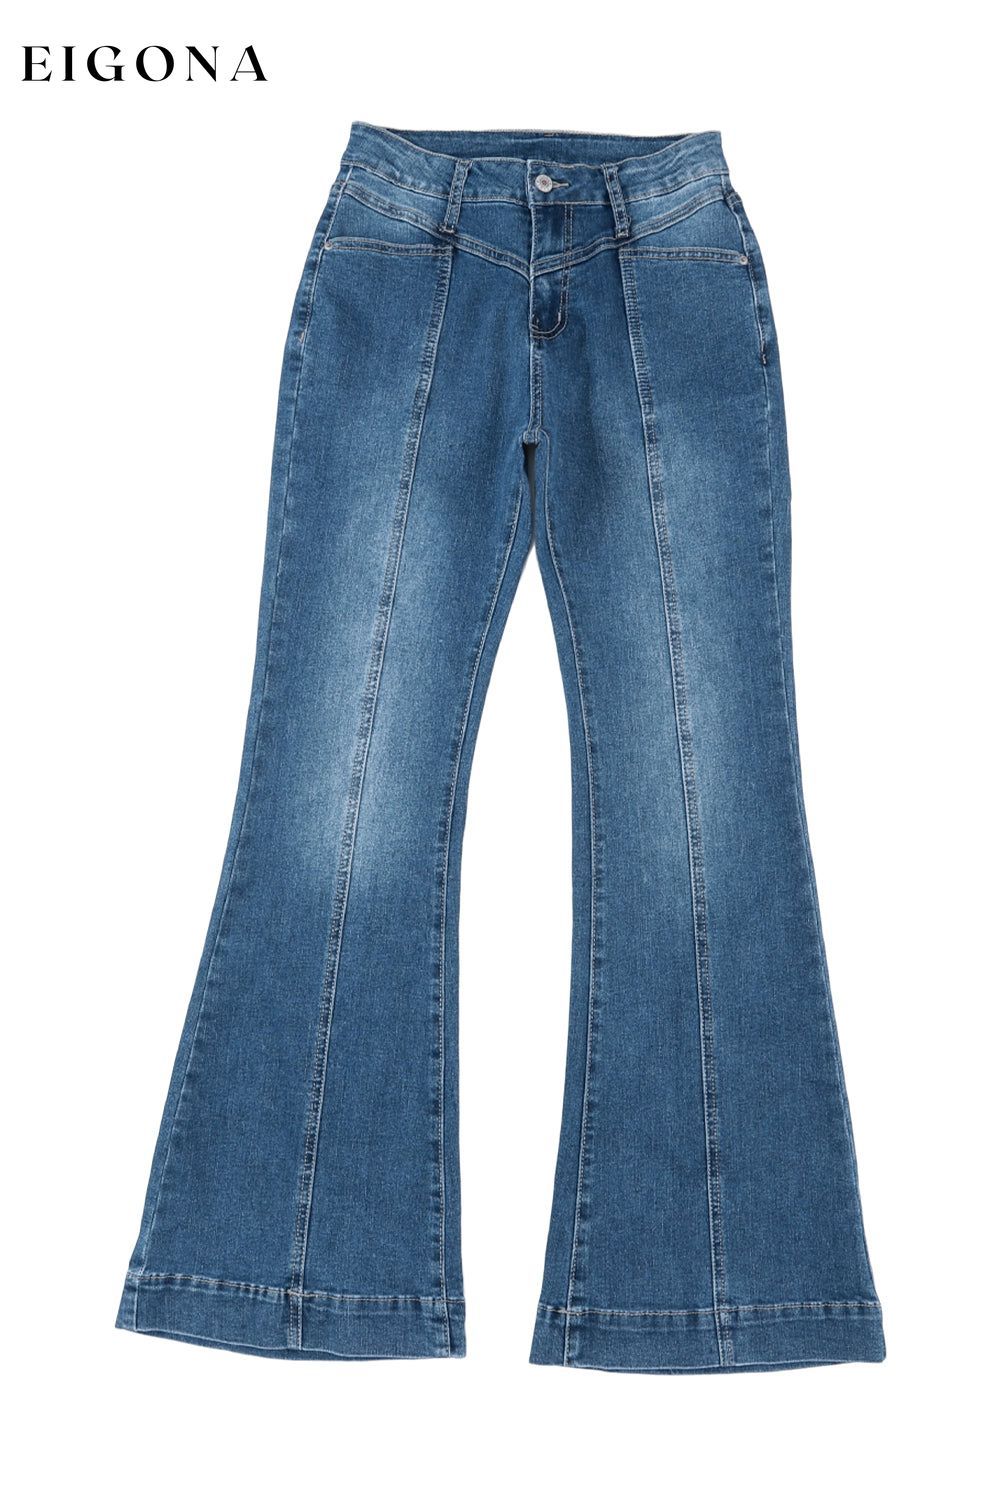 Blue High Waist Seam Stitching Pocket Flare Jeans All In Stock bottoms clothes Color Blue Craft Patchwork Early Fall Collection Hot picks jeans Occasion Daily Season Spring Silhouette Flare Style Western